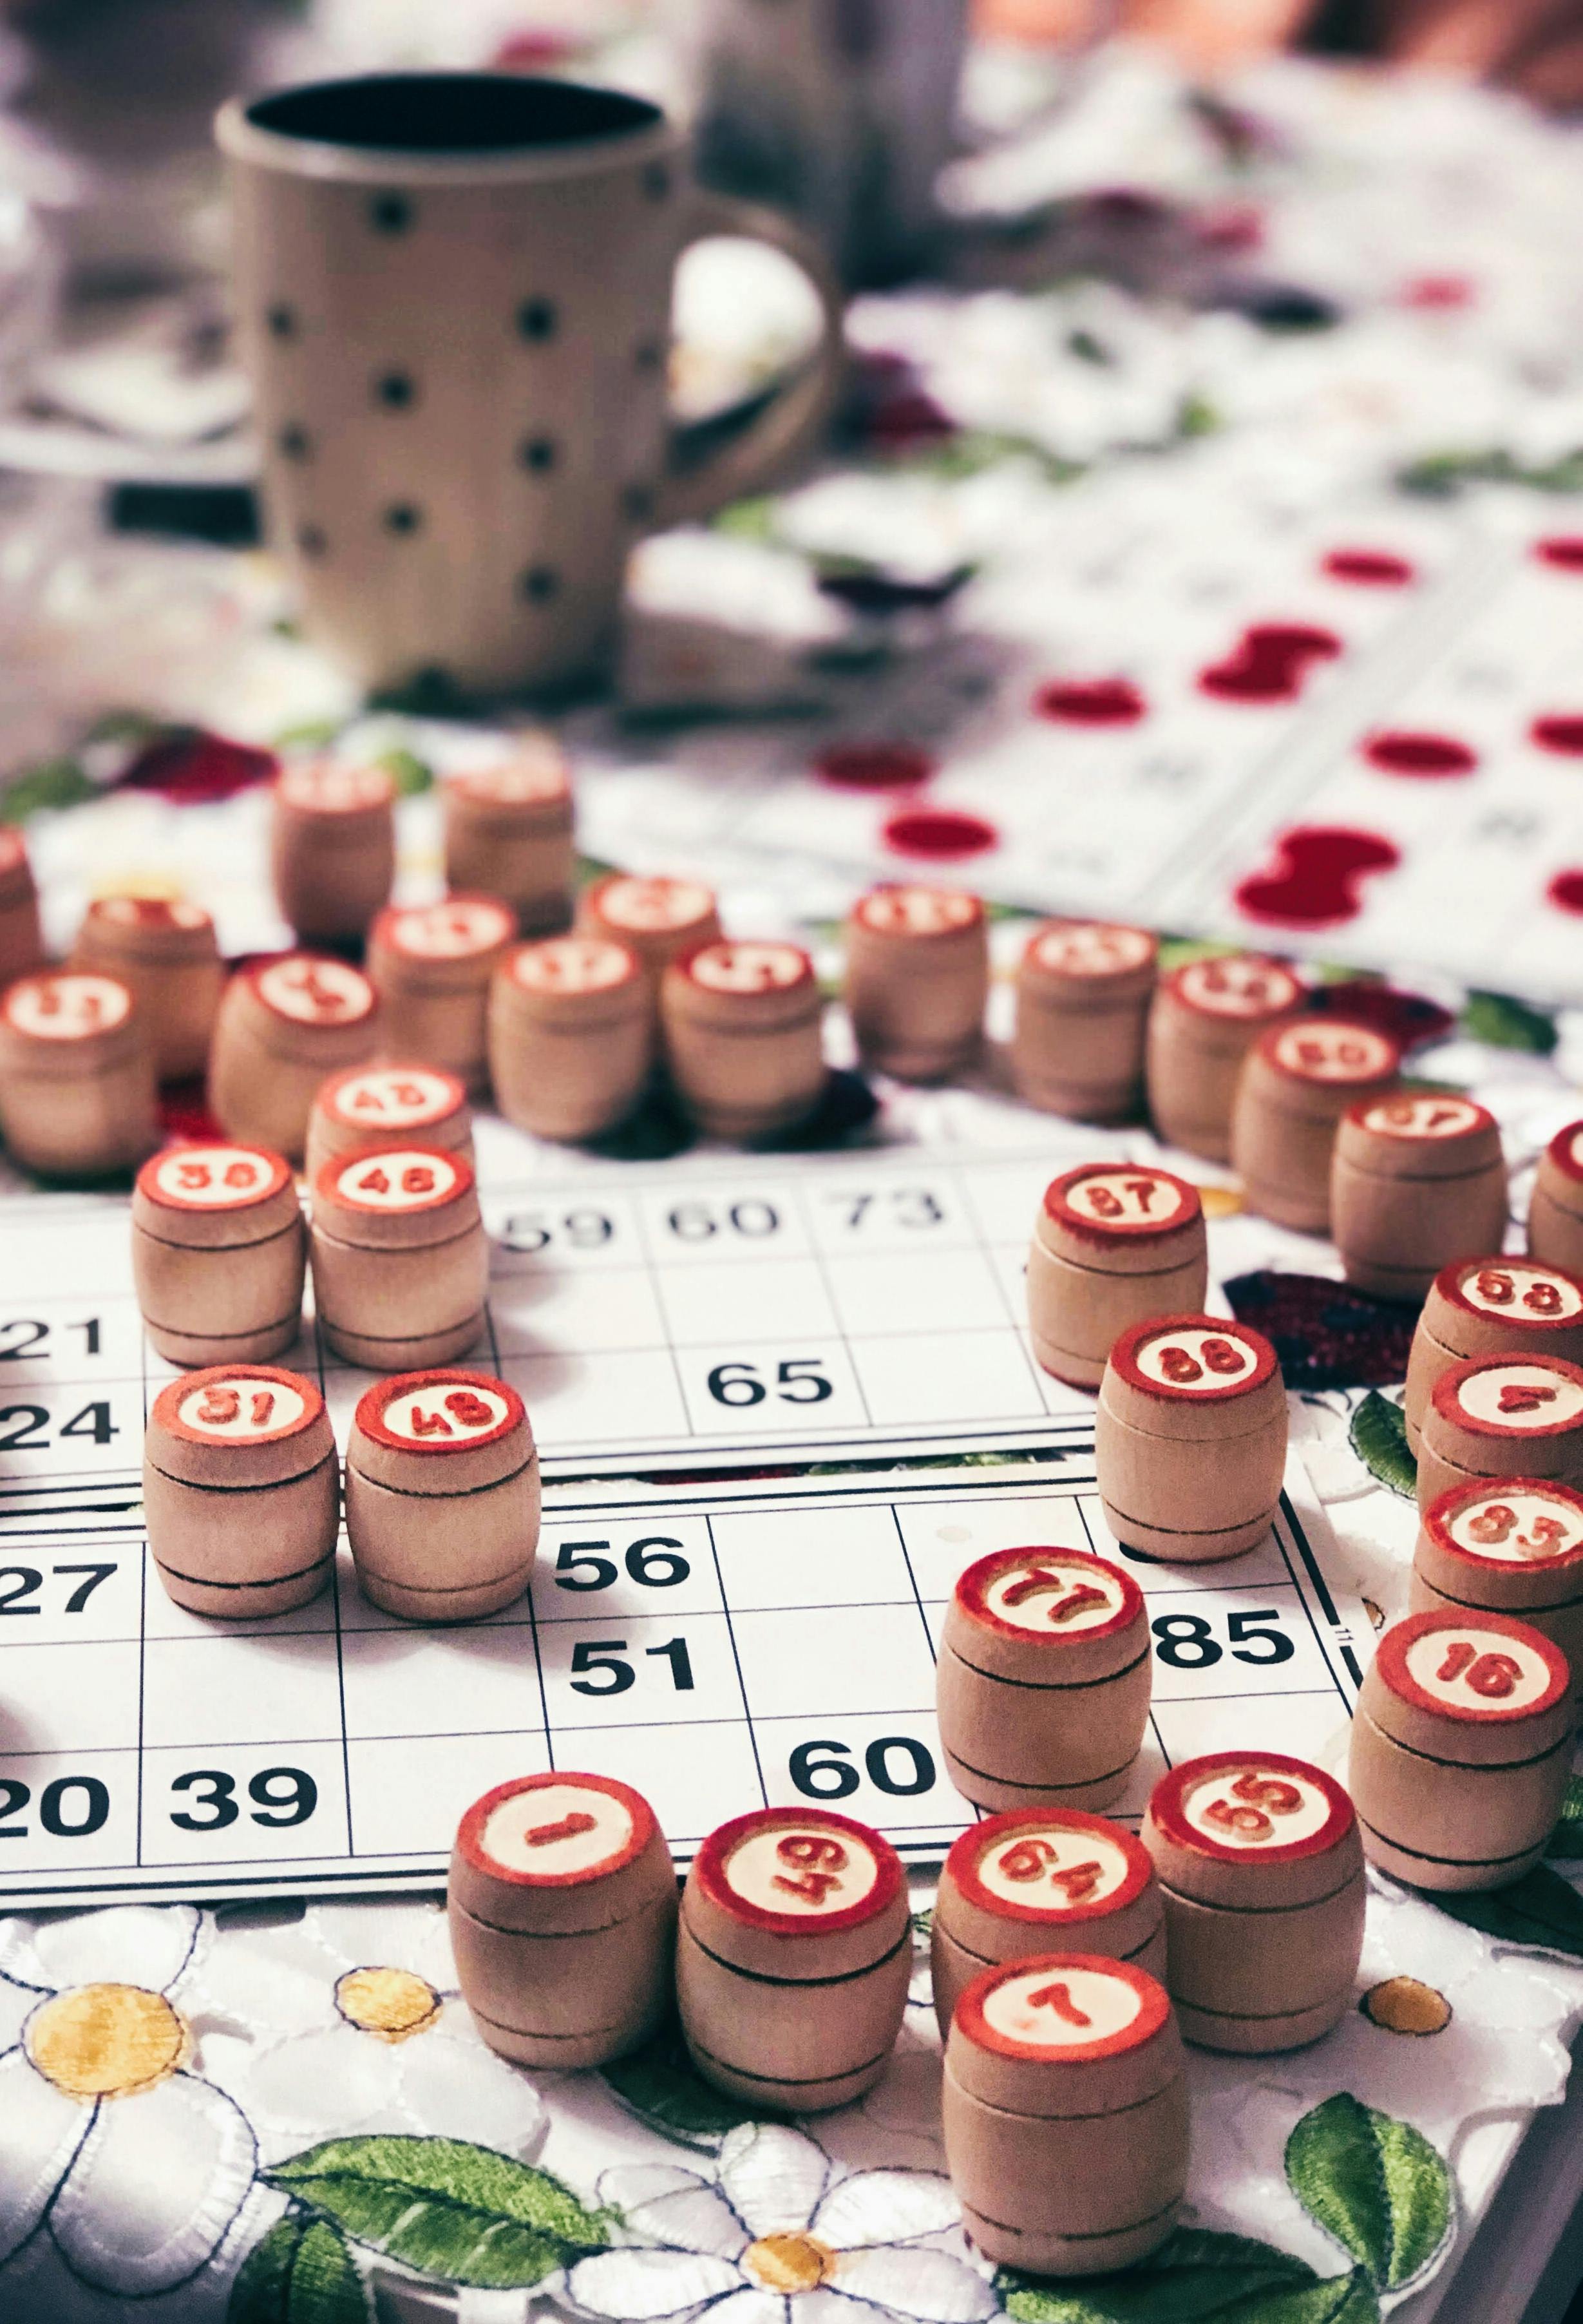 Finding All of the Greatest Bingo Games and Bonuses for 2022